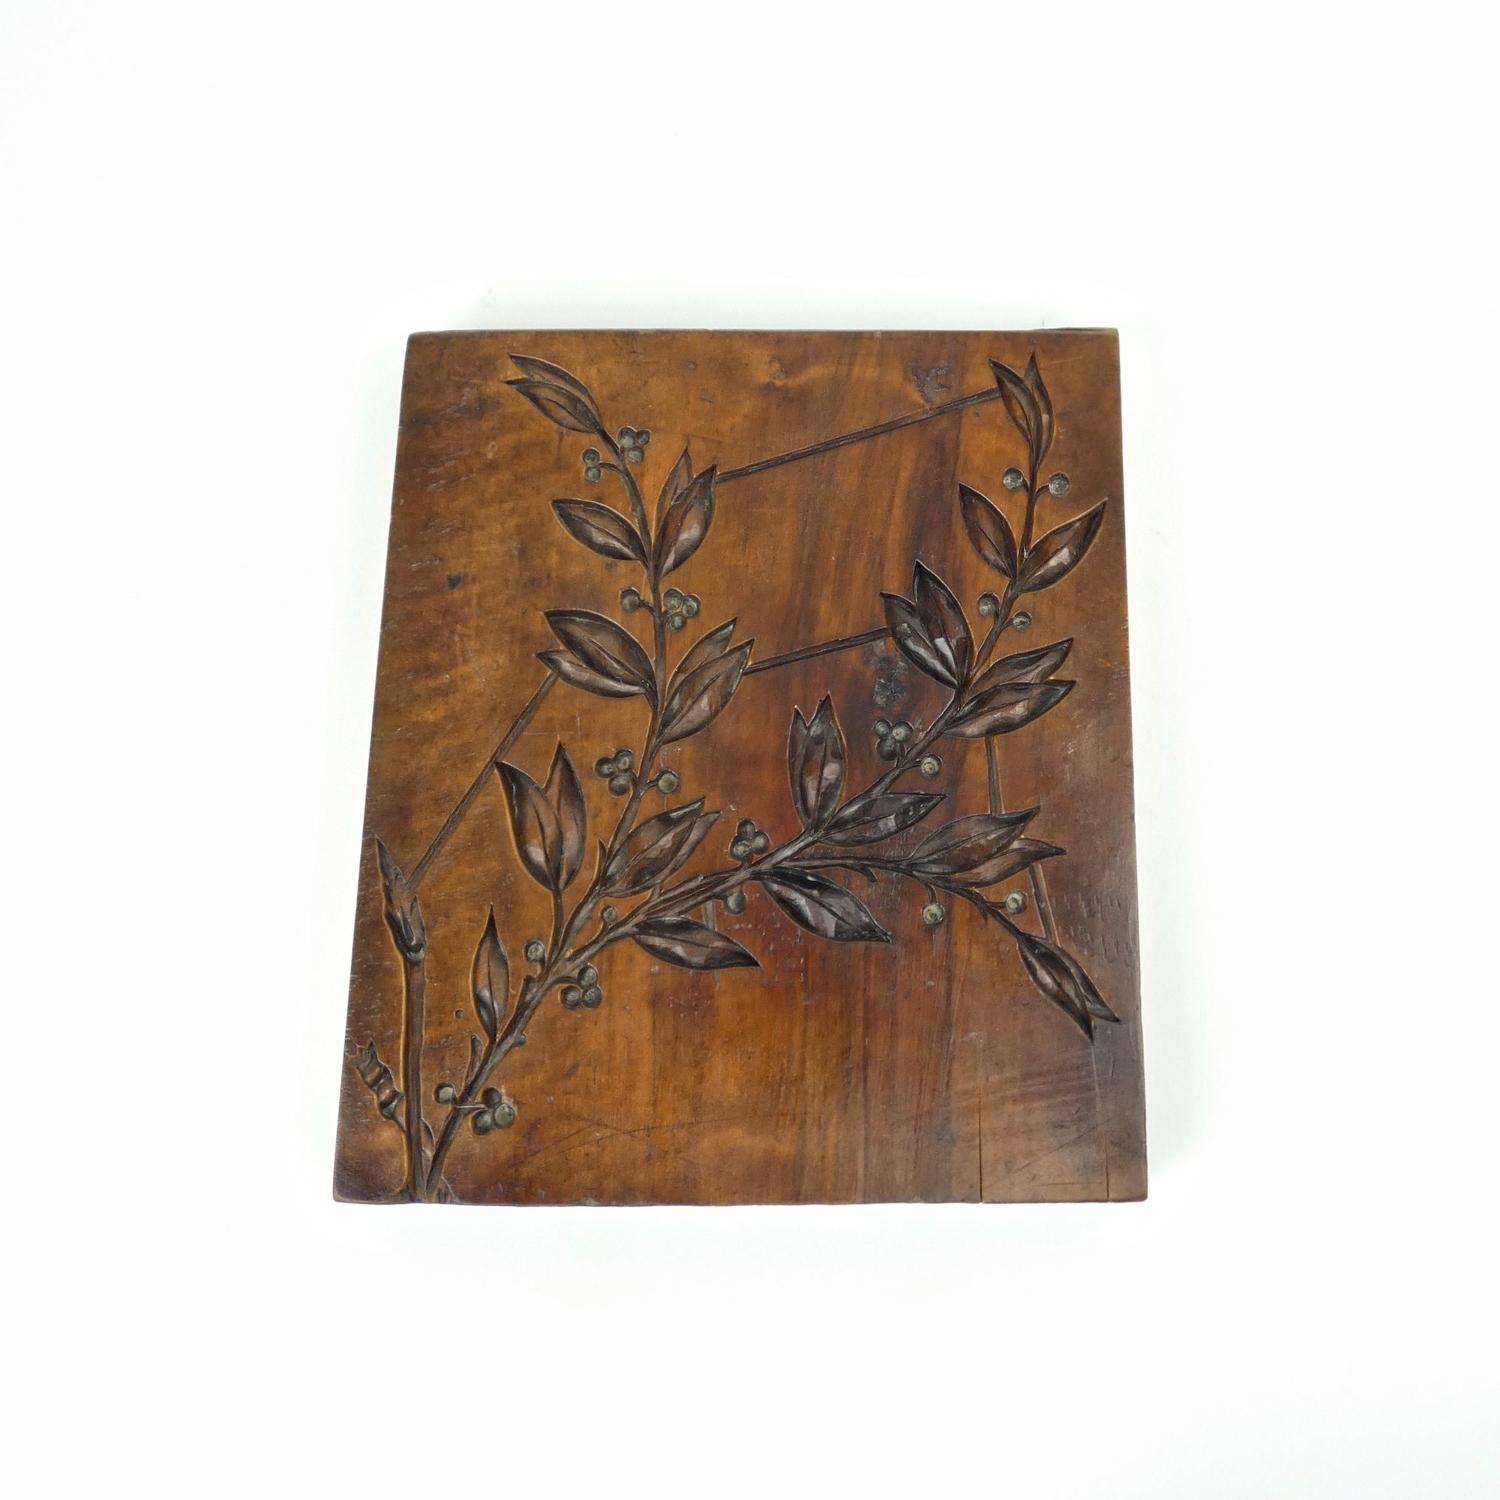 Gesso mould carved with laurel.